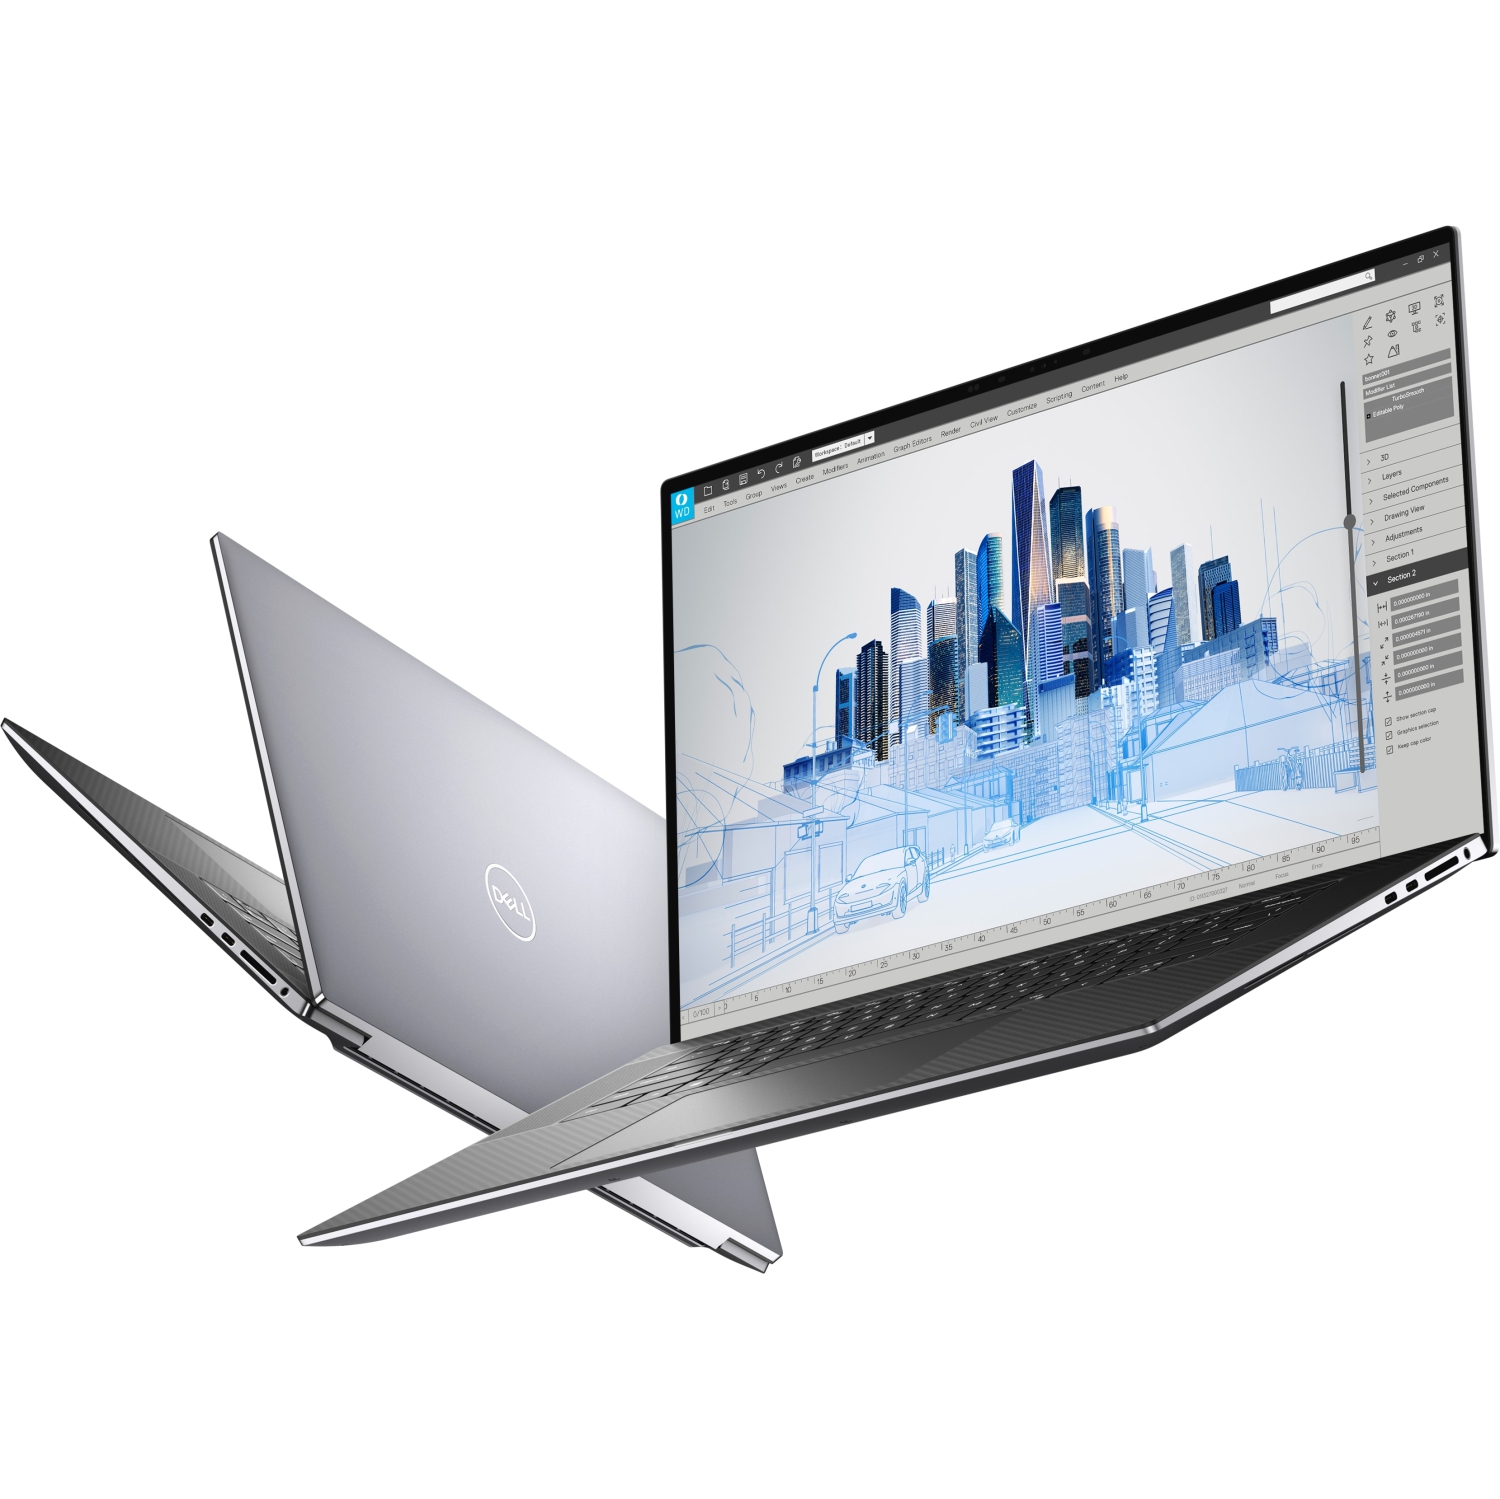 Refurbished (Excellent) - Dell Precision 5000 5760 Workstation Laptop (2021), 17" 4K Touch, Core Xeon W - 1TB SSD - 64GB RAM - RTX A3000, 4.9 GHz - 11th Gen CPU Certified